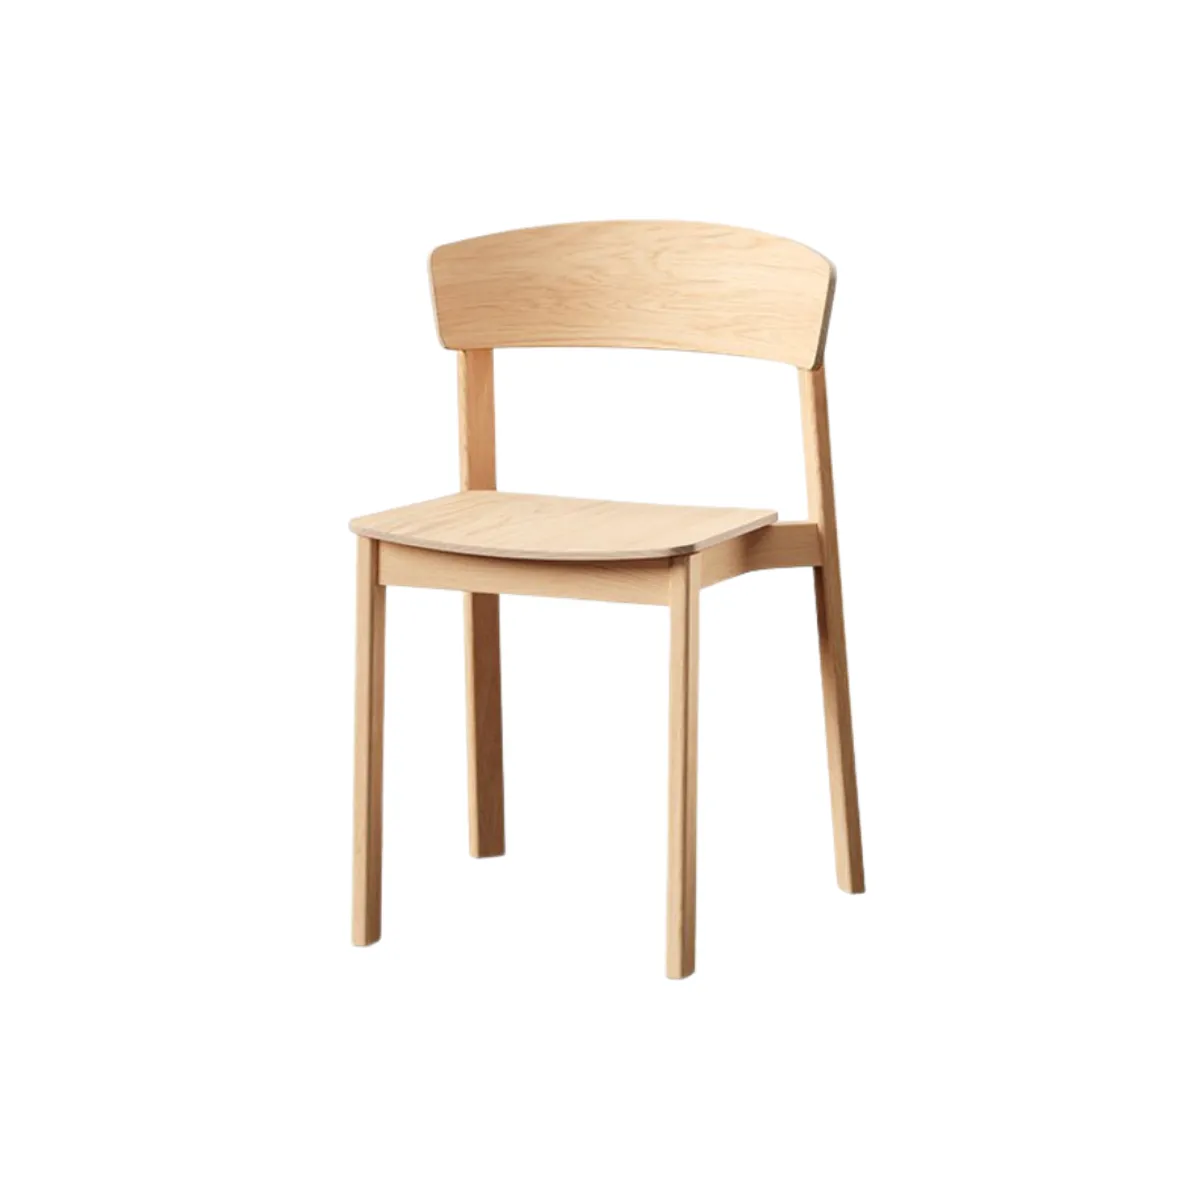 Forlan side chair